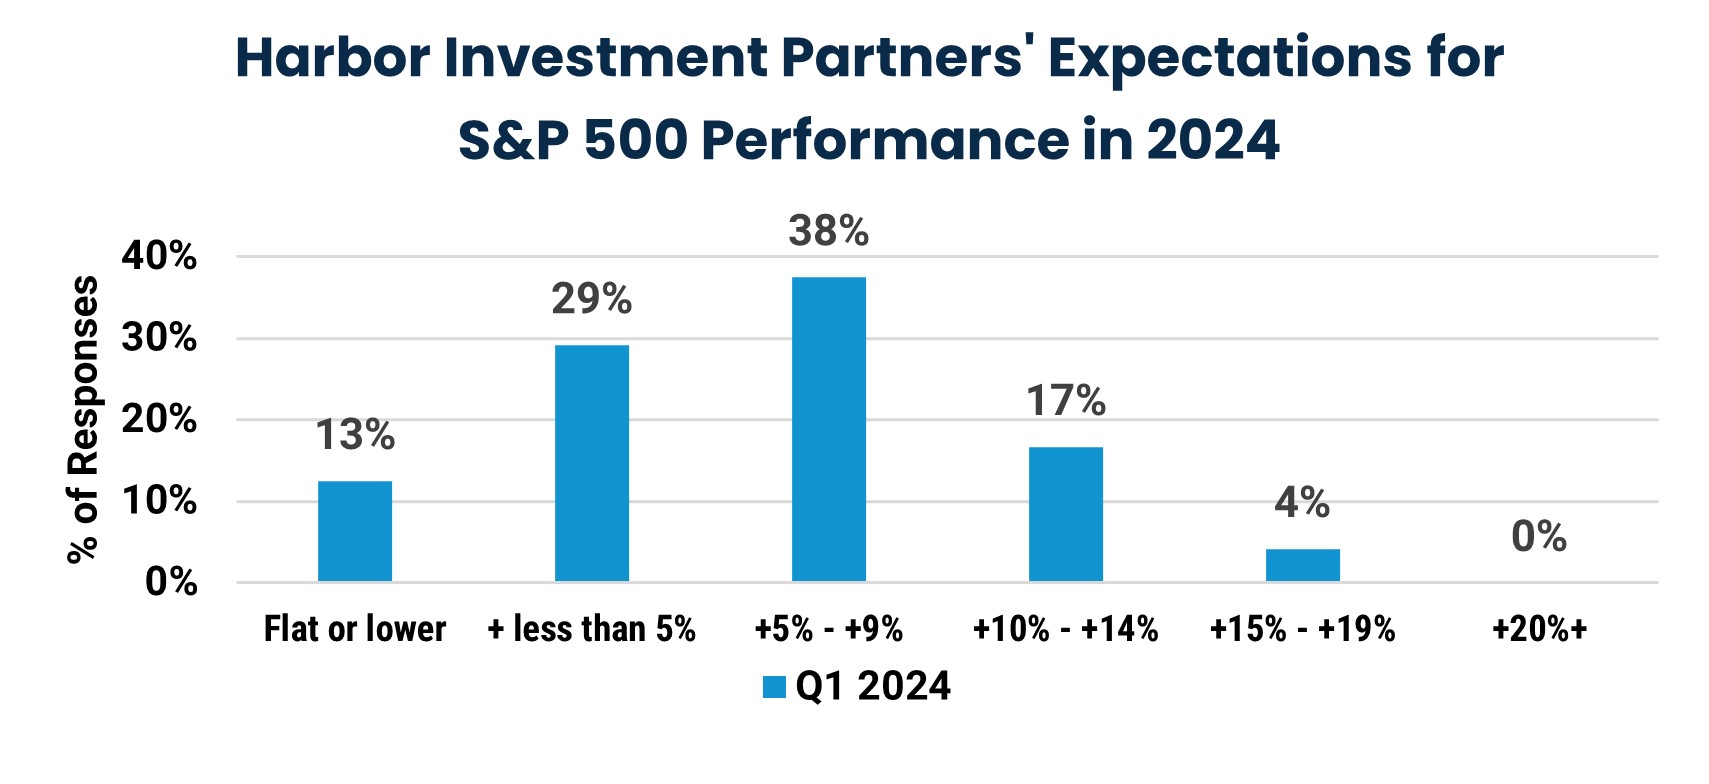 Harbor Investment Partners' Expectations for S&P 500 Performance in 2024